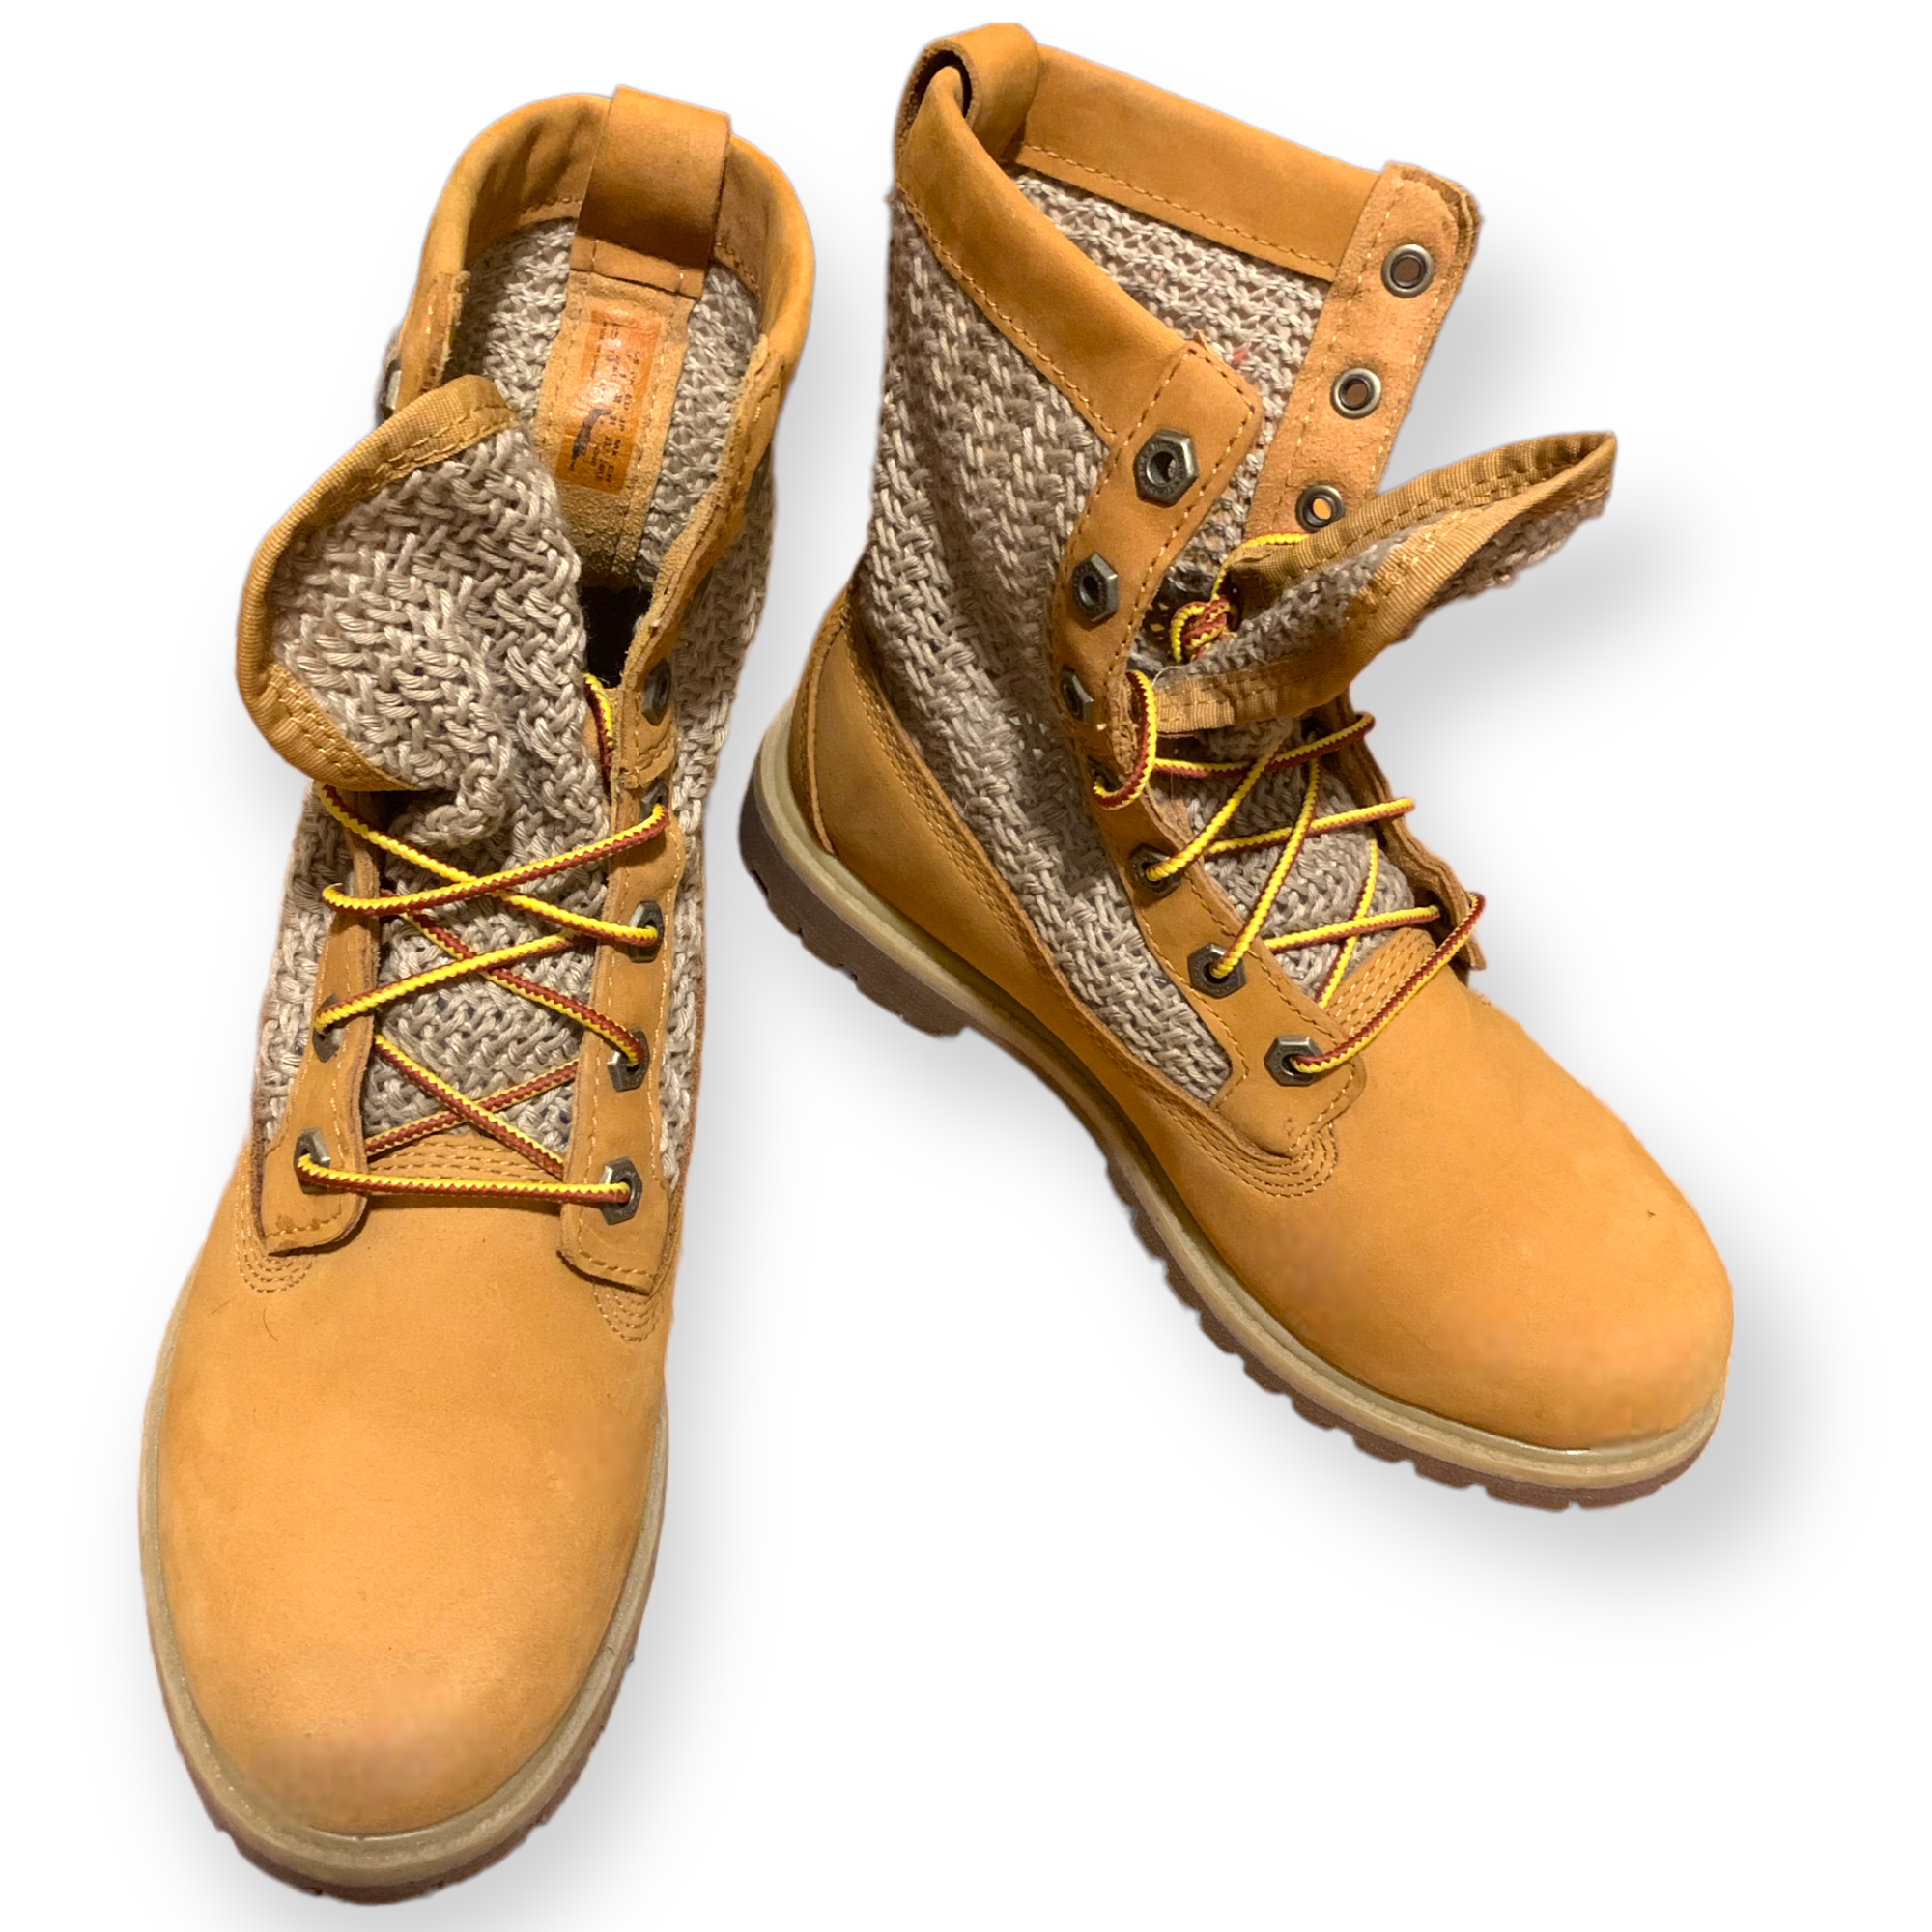 TIMBERLAND boots with Burlap Woven Accents